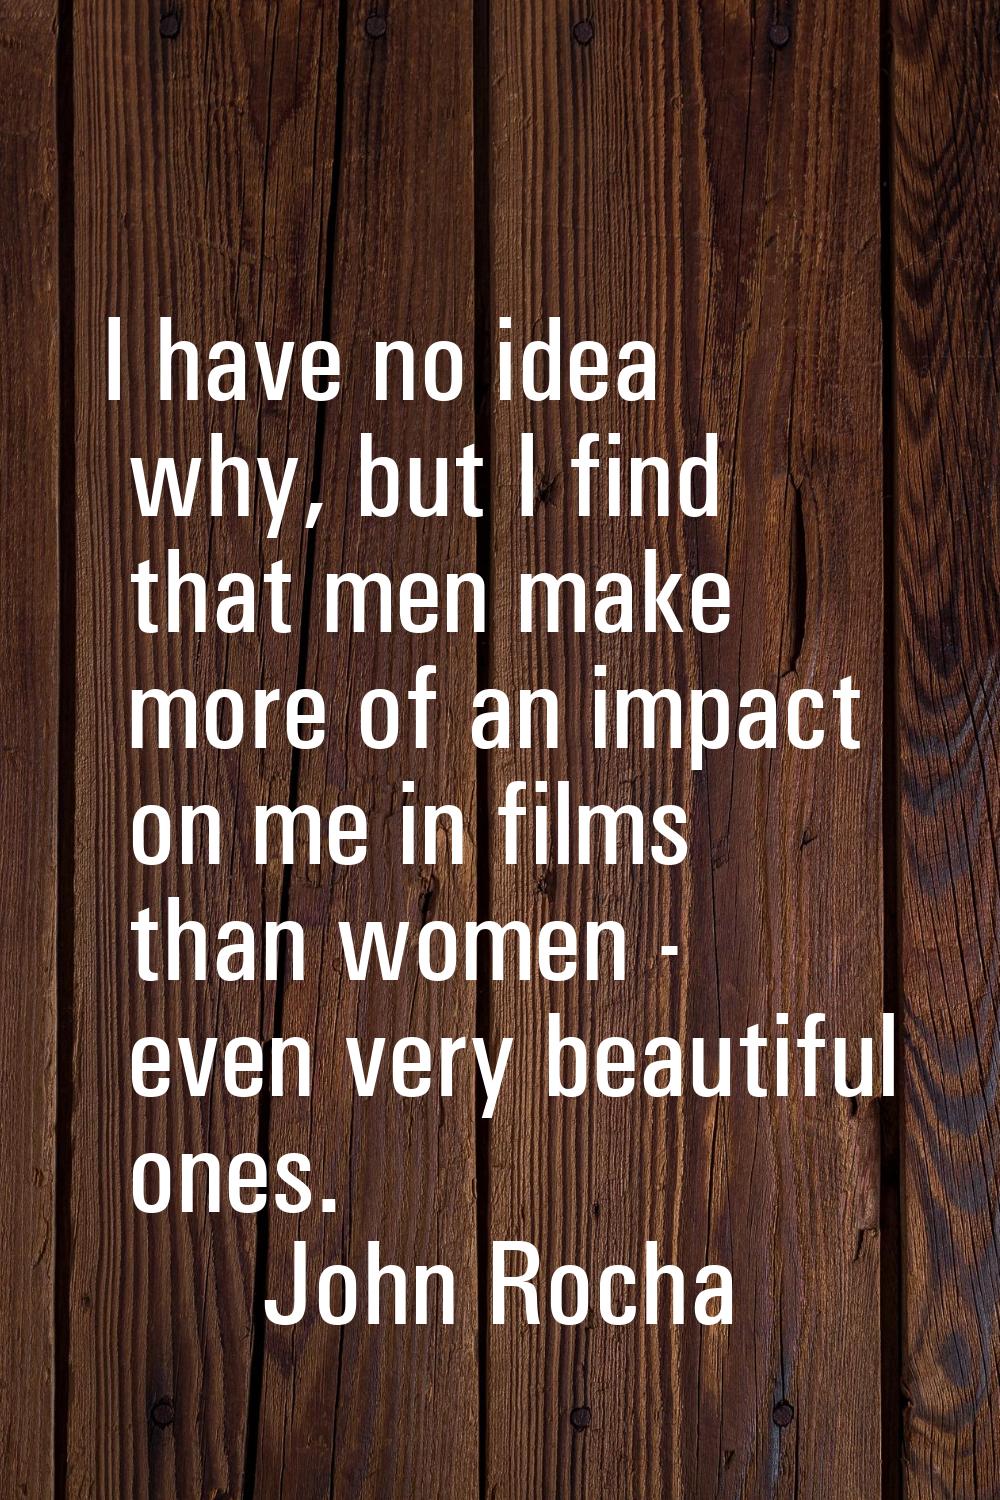 I have no idea why, but I find that men make more of an impact on me in films than women - even ver